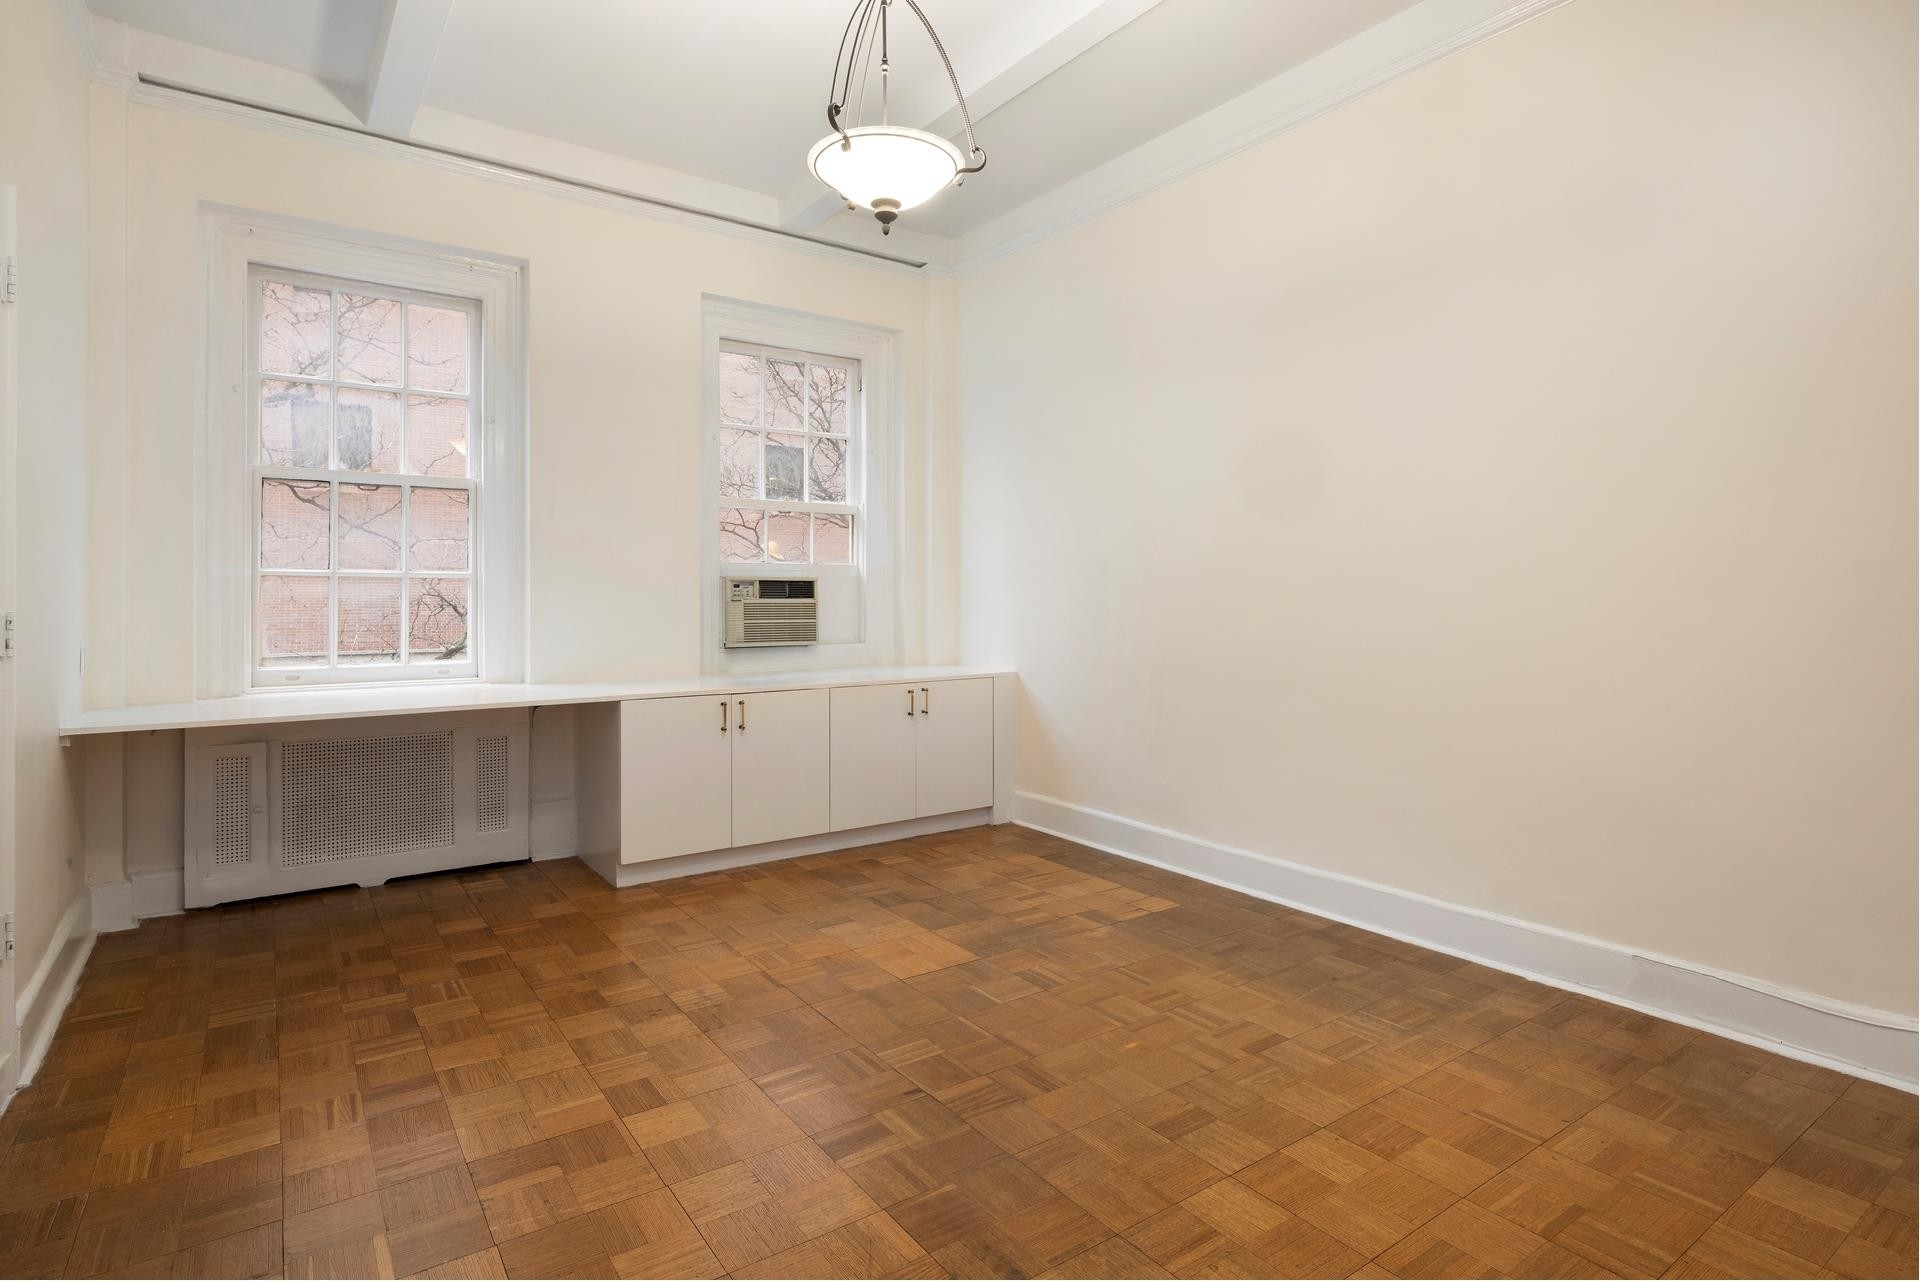 11. Co-op Properties for Sale at 829 PARK AVE, 2A Lenox Hill, New York, NY 10021